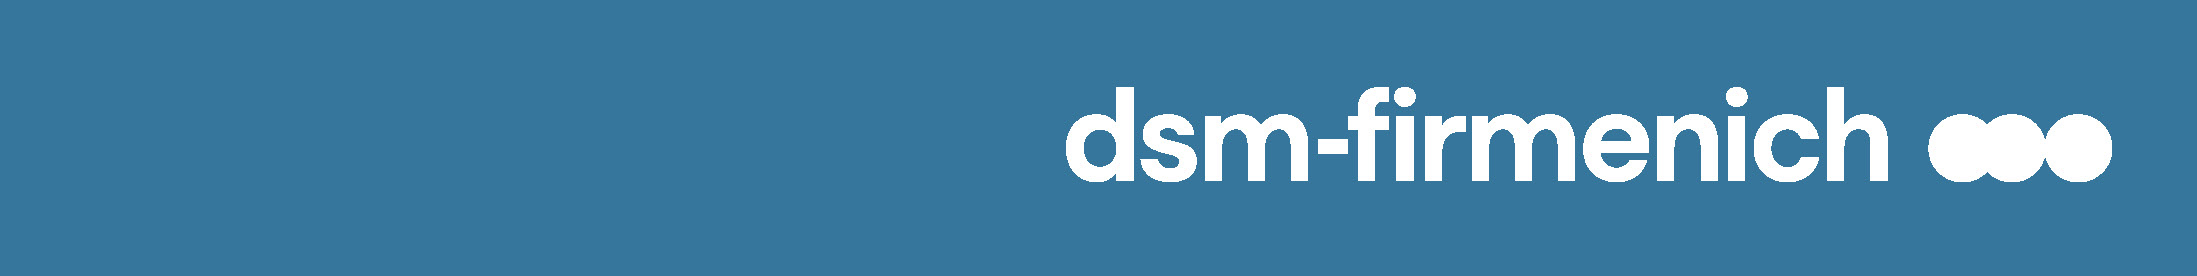 DSM Nutritional Products GmbH